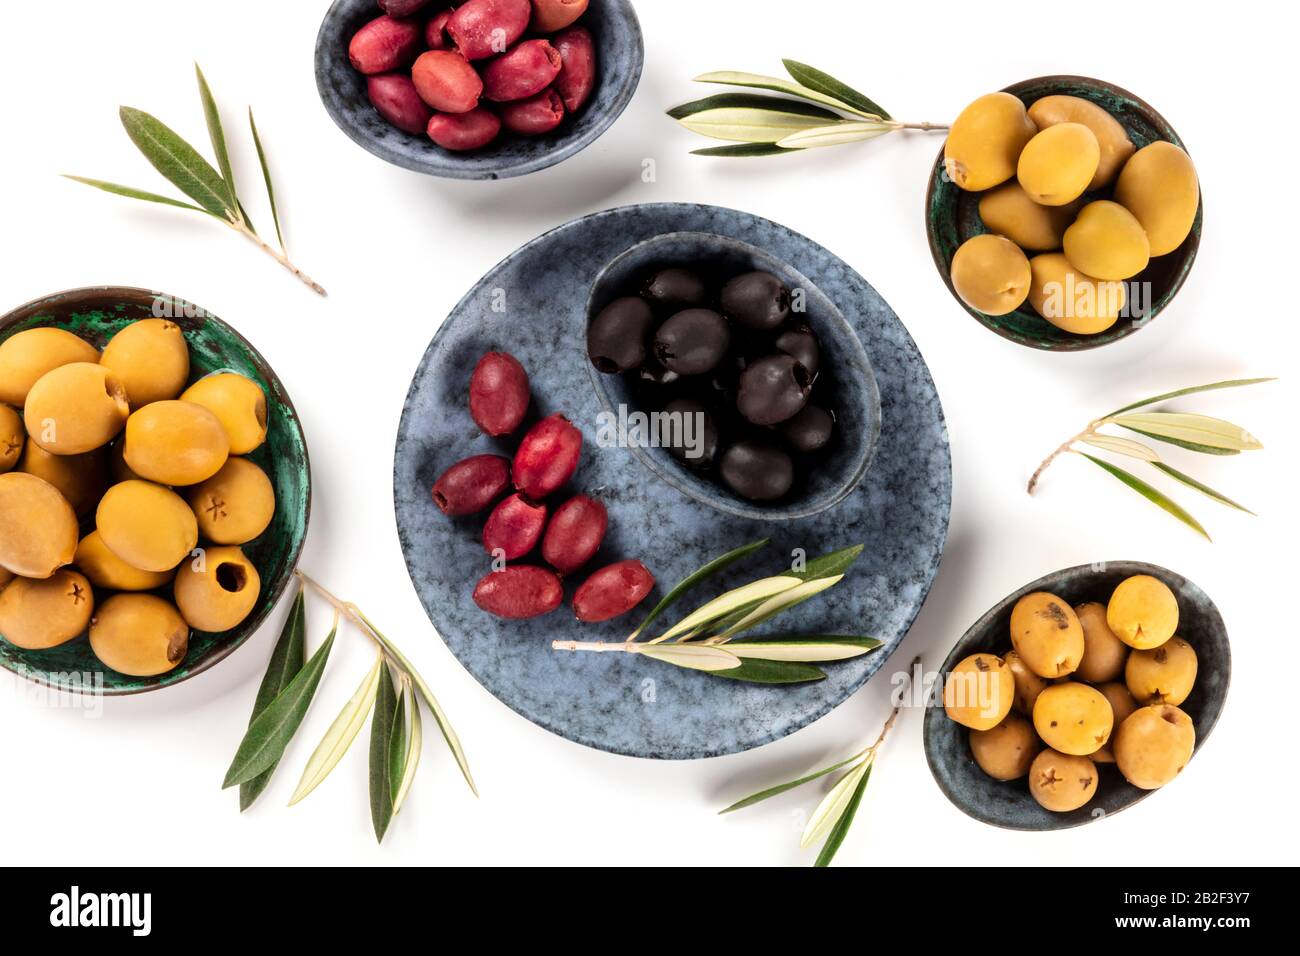 Olives, green, black and red, shot from the top on a white background Stock Photo